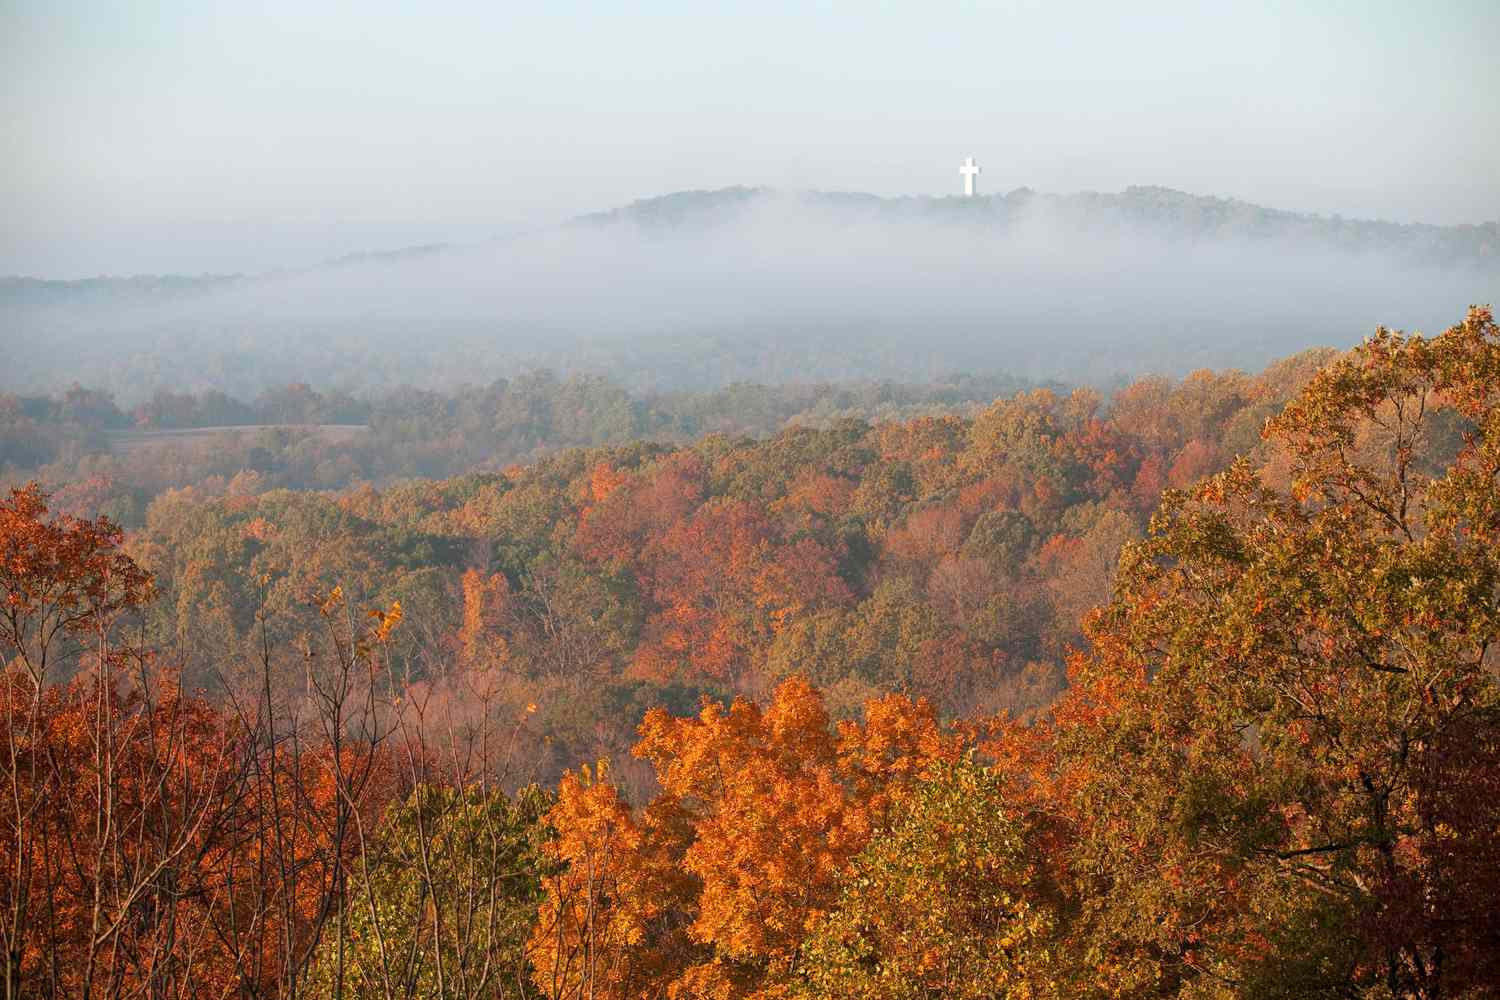 The 111-foot-tall Bald Knob Cross of Peace stands across the valley from a lookout point in Alto Pass.